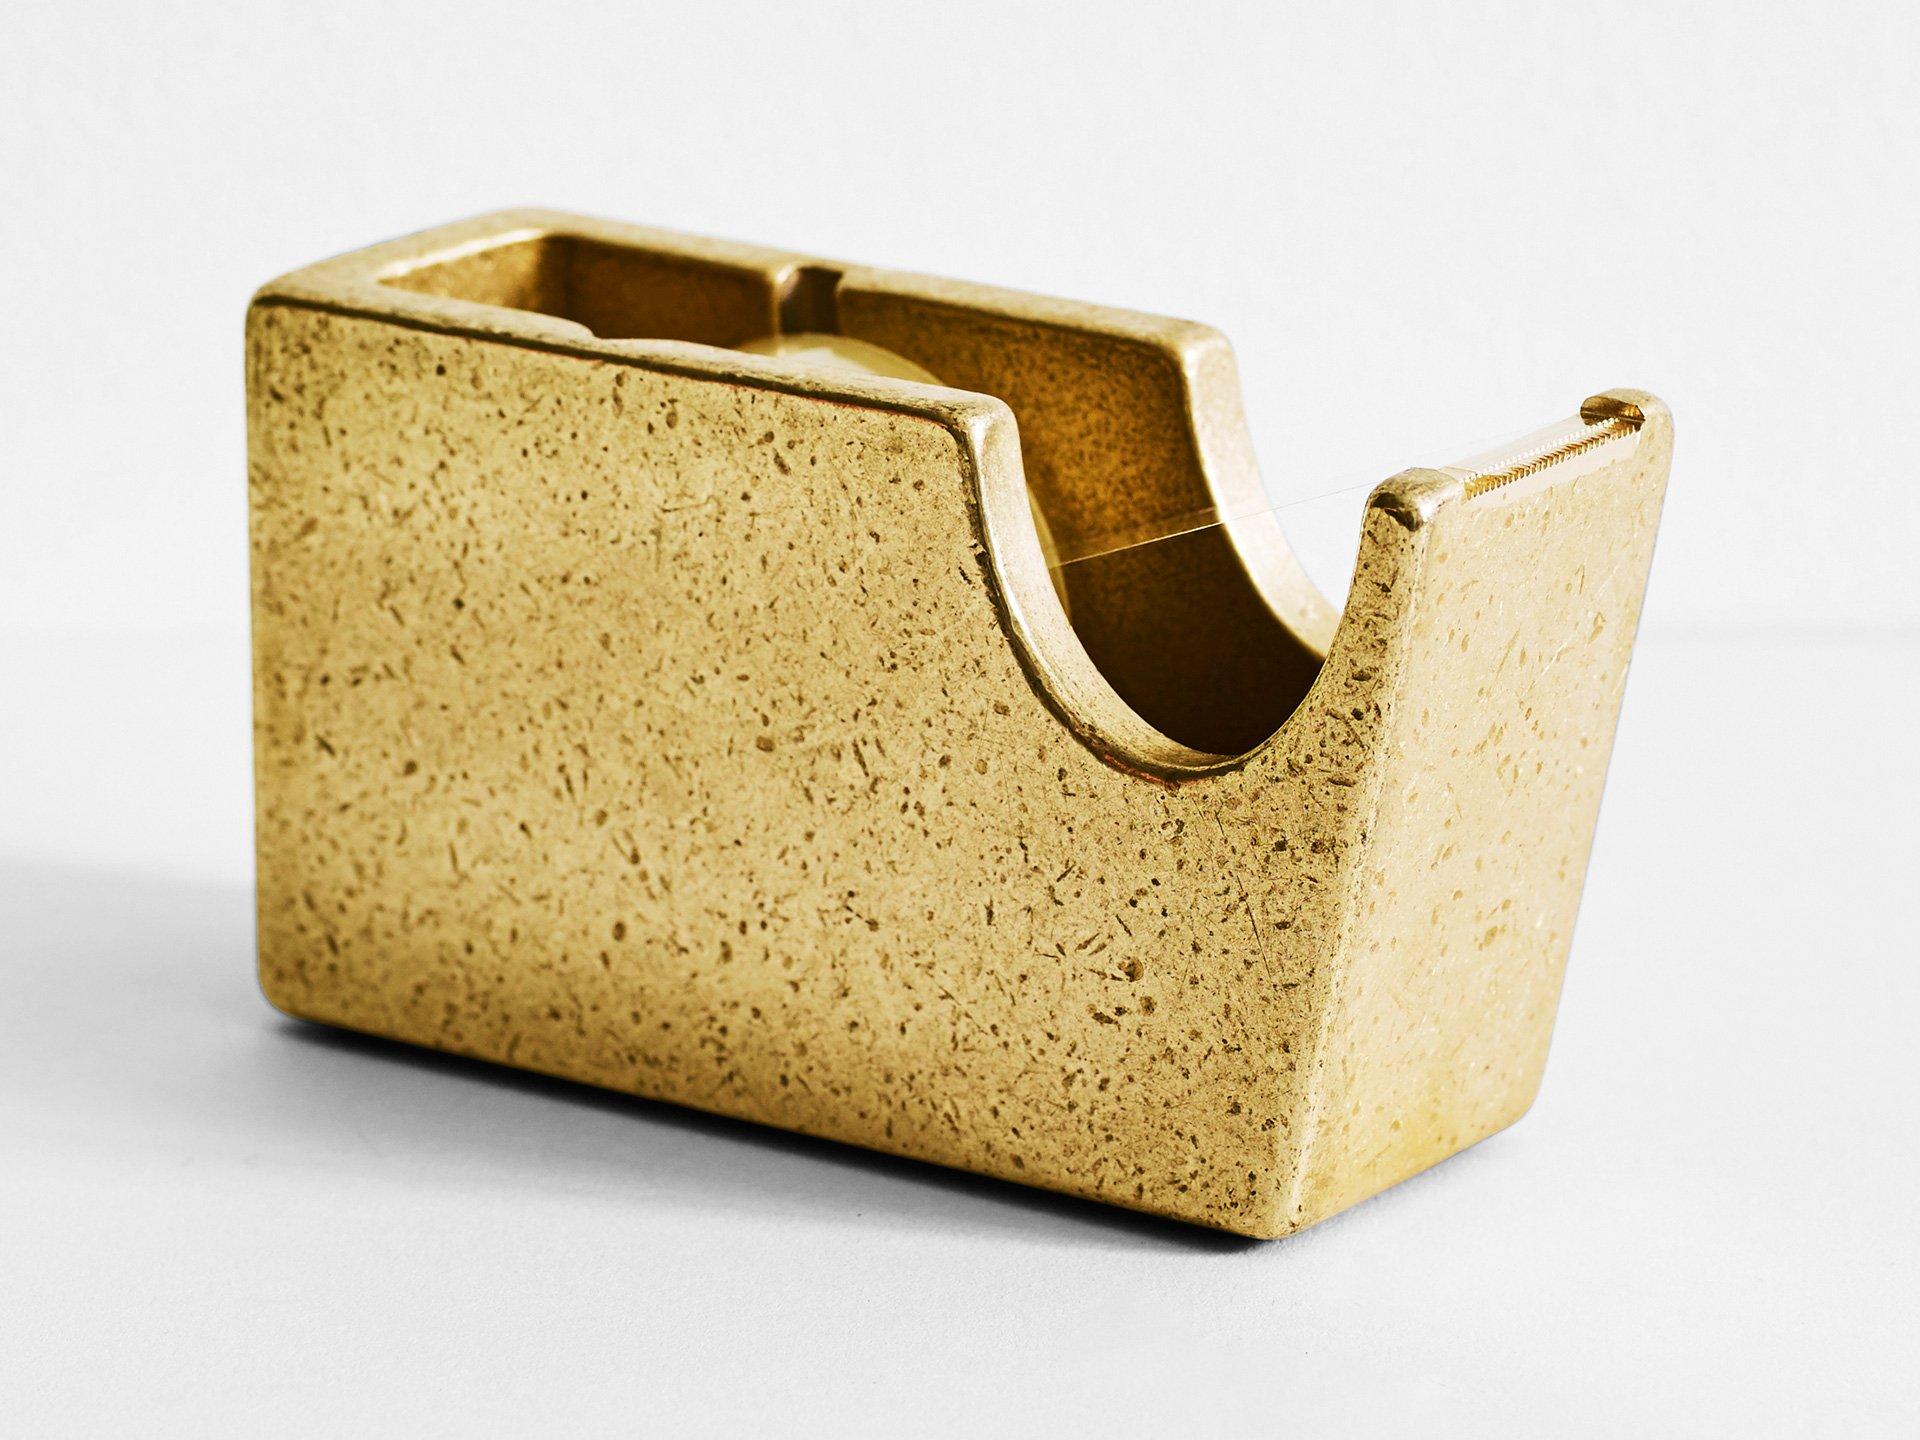 Brass Tape Dispenser by Henry Wilson
Dimensions: W 14 x D 5 x H 7 cm
Materials: Brass 

The brass tape dispenser is a hefty piece of stationery. It is cast in solid brass with machined teeth. Fits standard scotch tape rolls. It is rumble finished